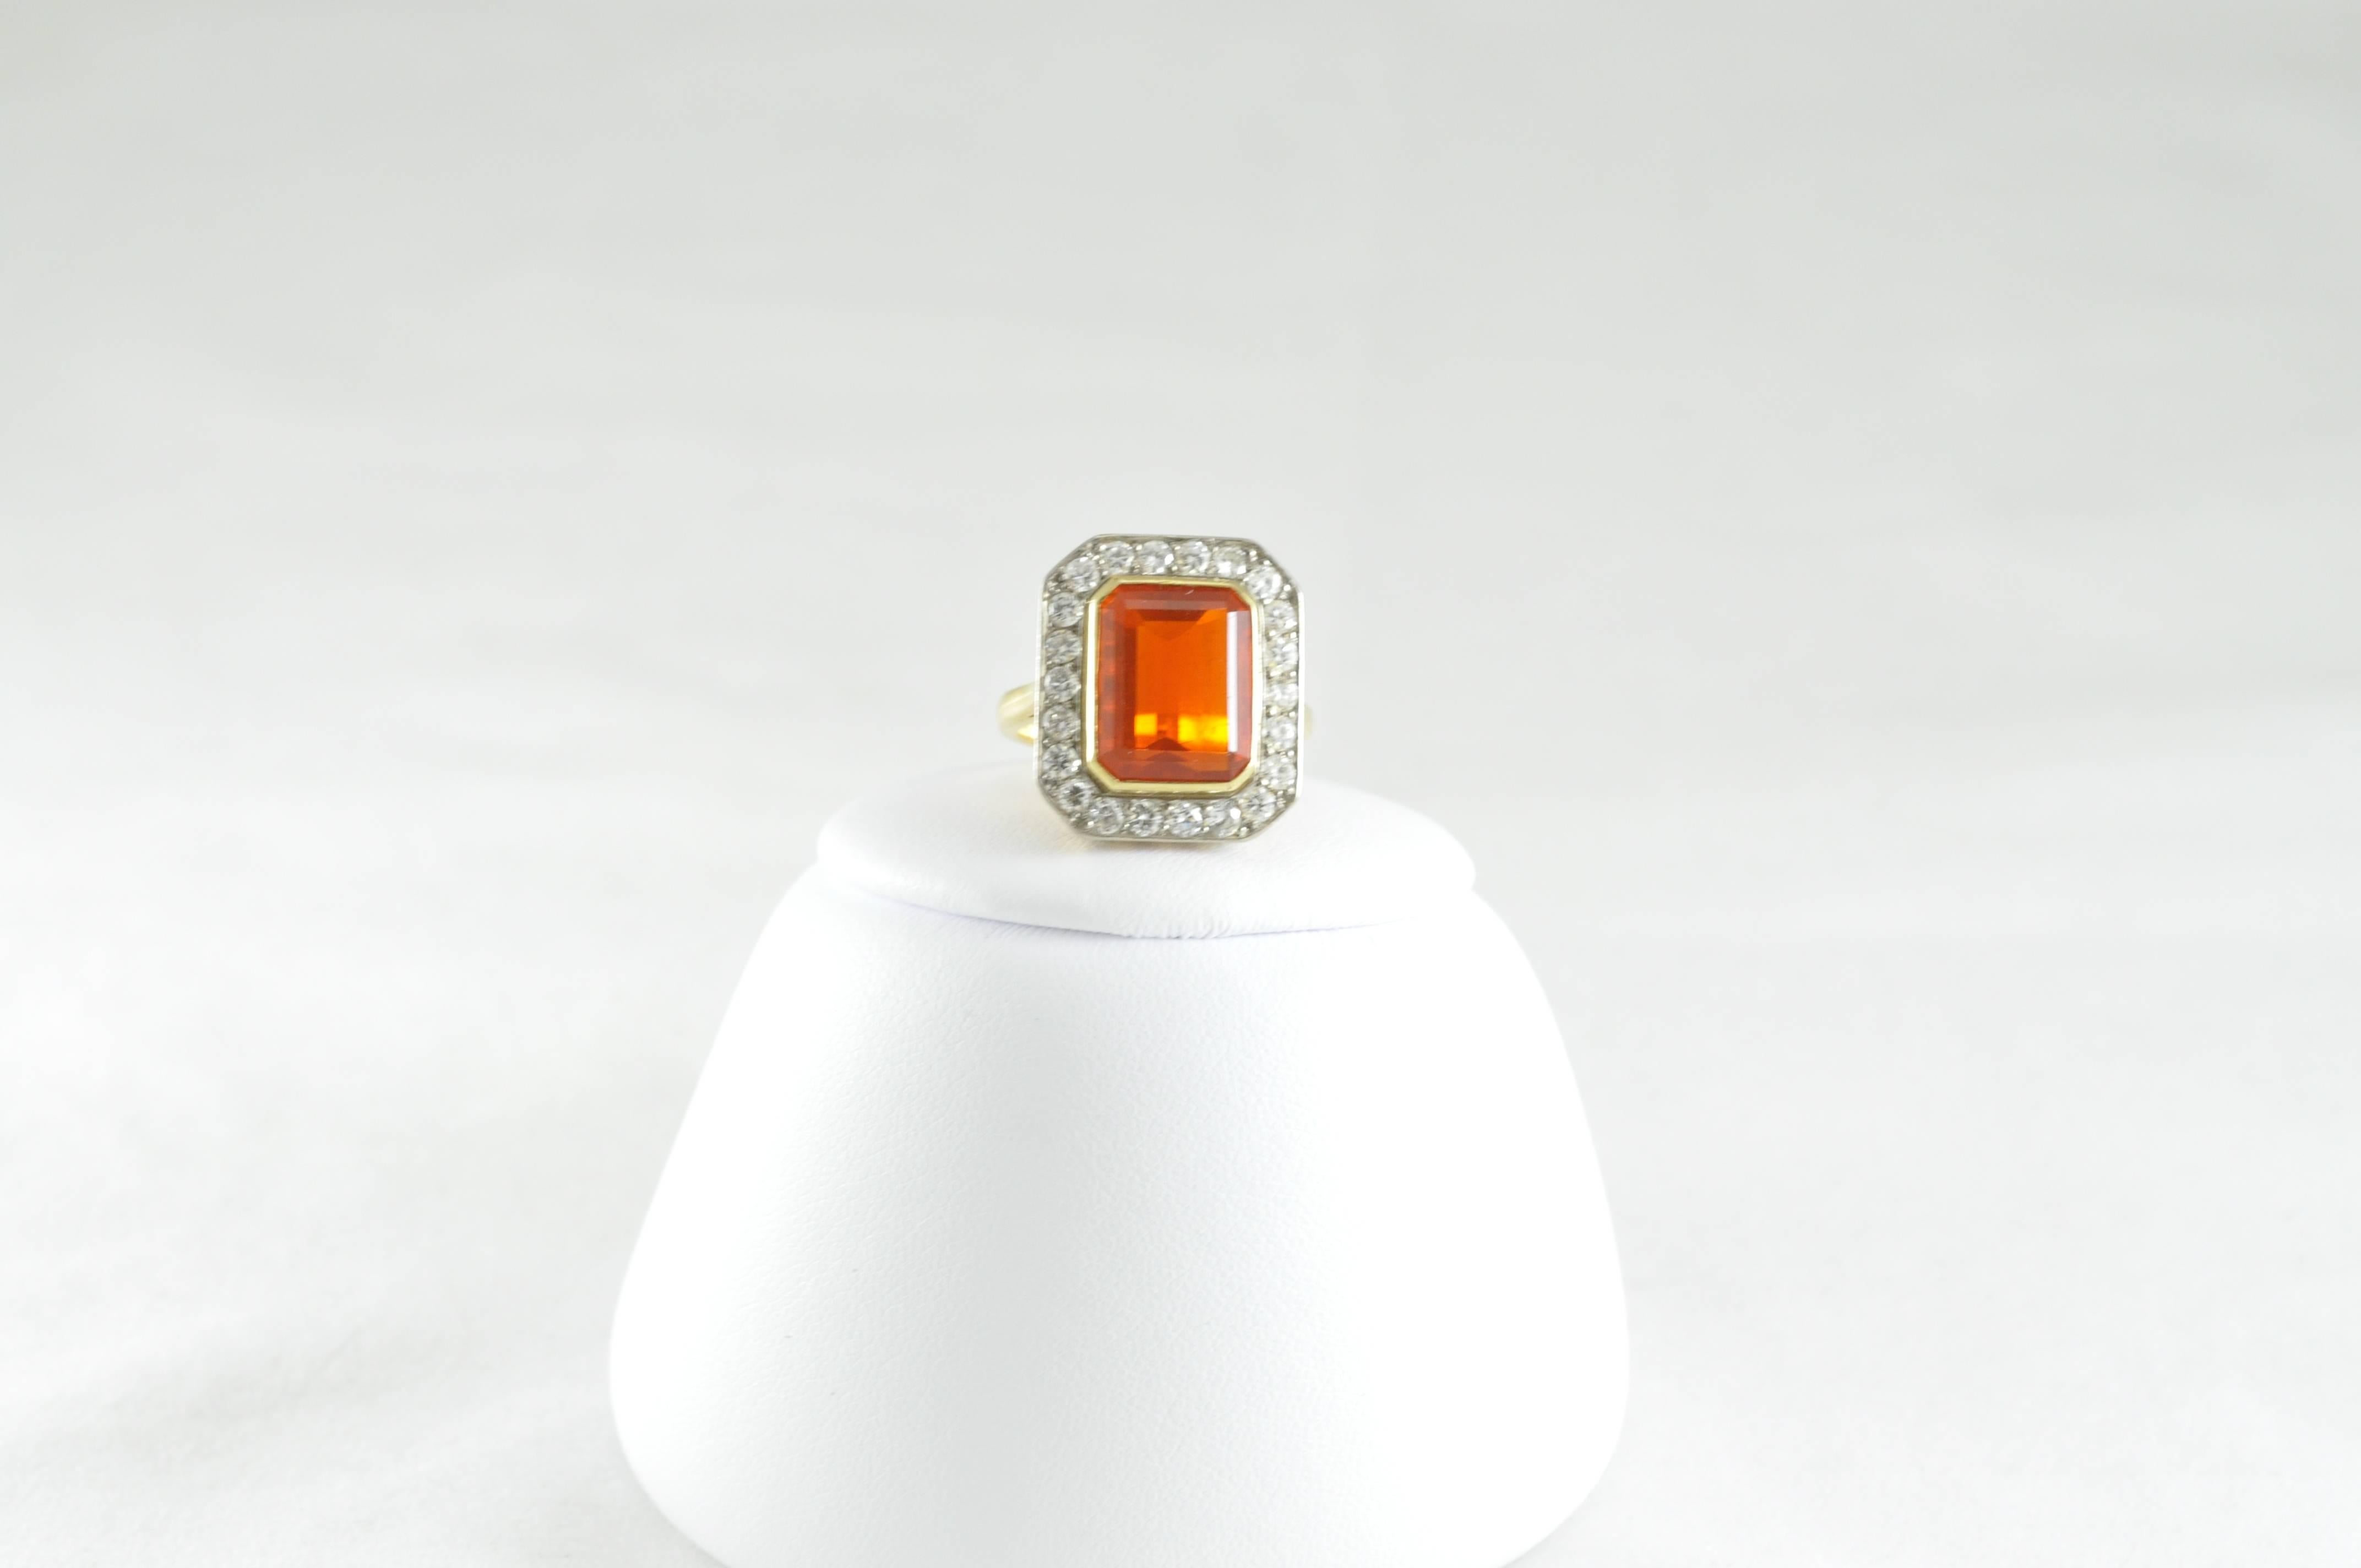 Stunning approximately 4.48ct Emerald-cut Fire Opal surrounded by 1.32ct round Diamonds set in 18k yellow gold. The ring is currently a size 7.75 but could be sized as needed. The ring is stamped S and D for Steele and Dolphin; a Crown insignia